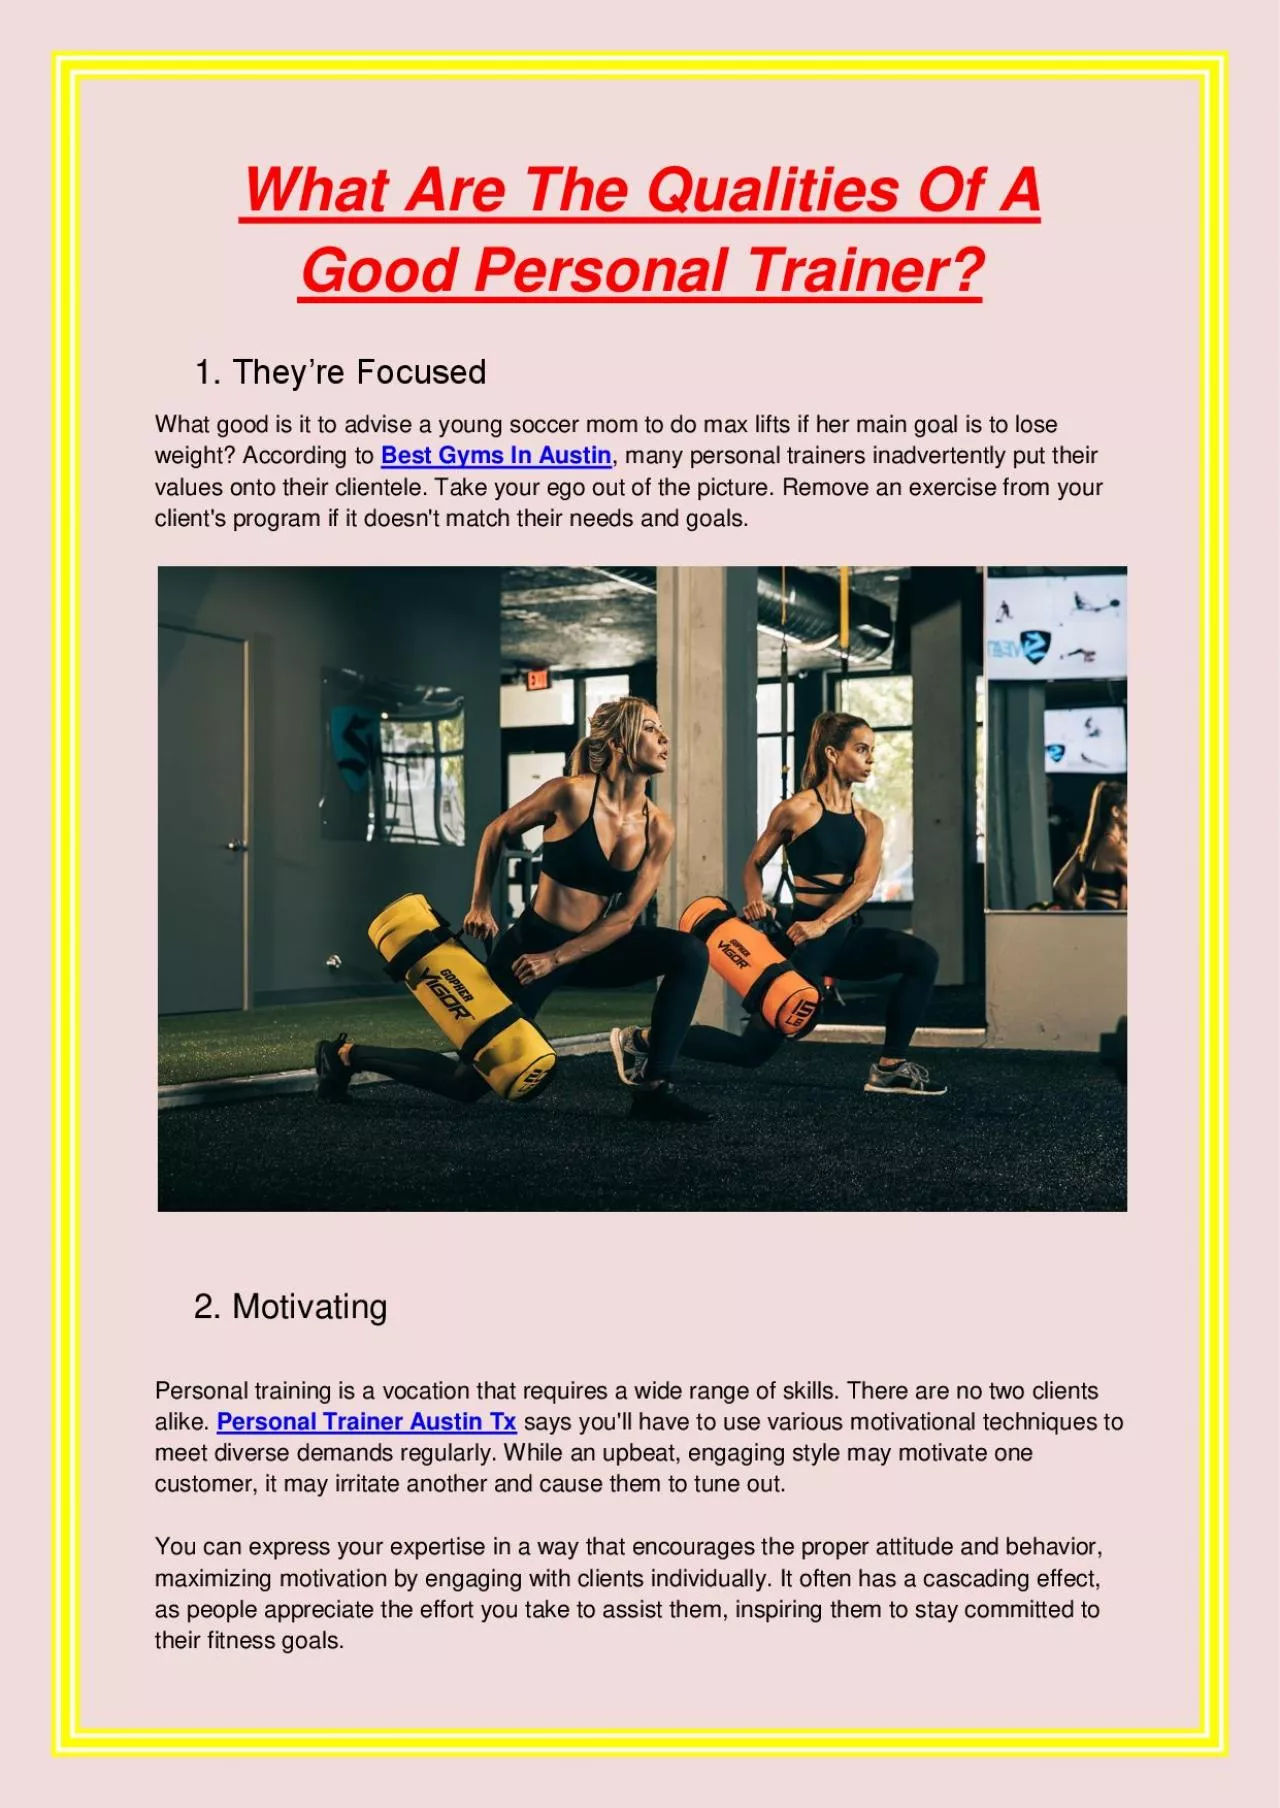 What Are The Qualities Of A Good Personal Trainer?